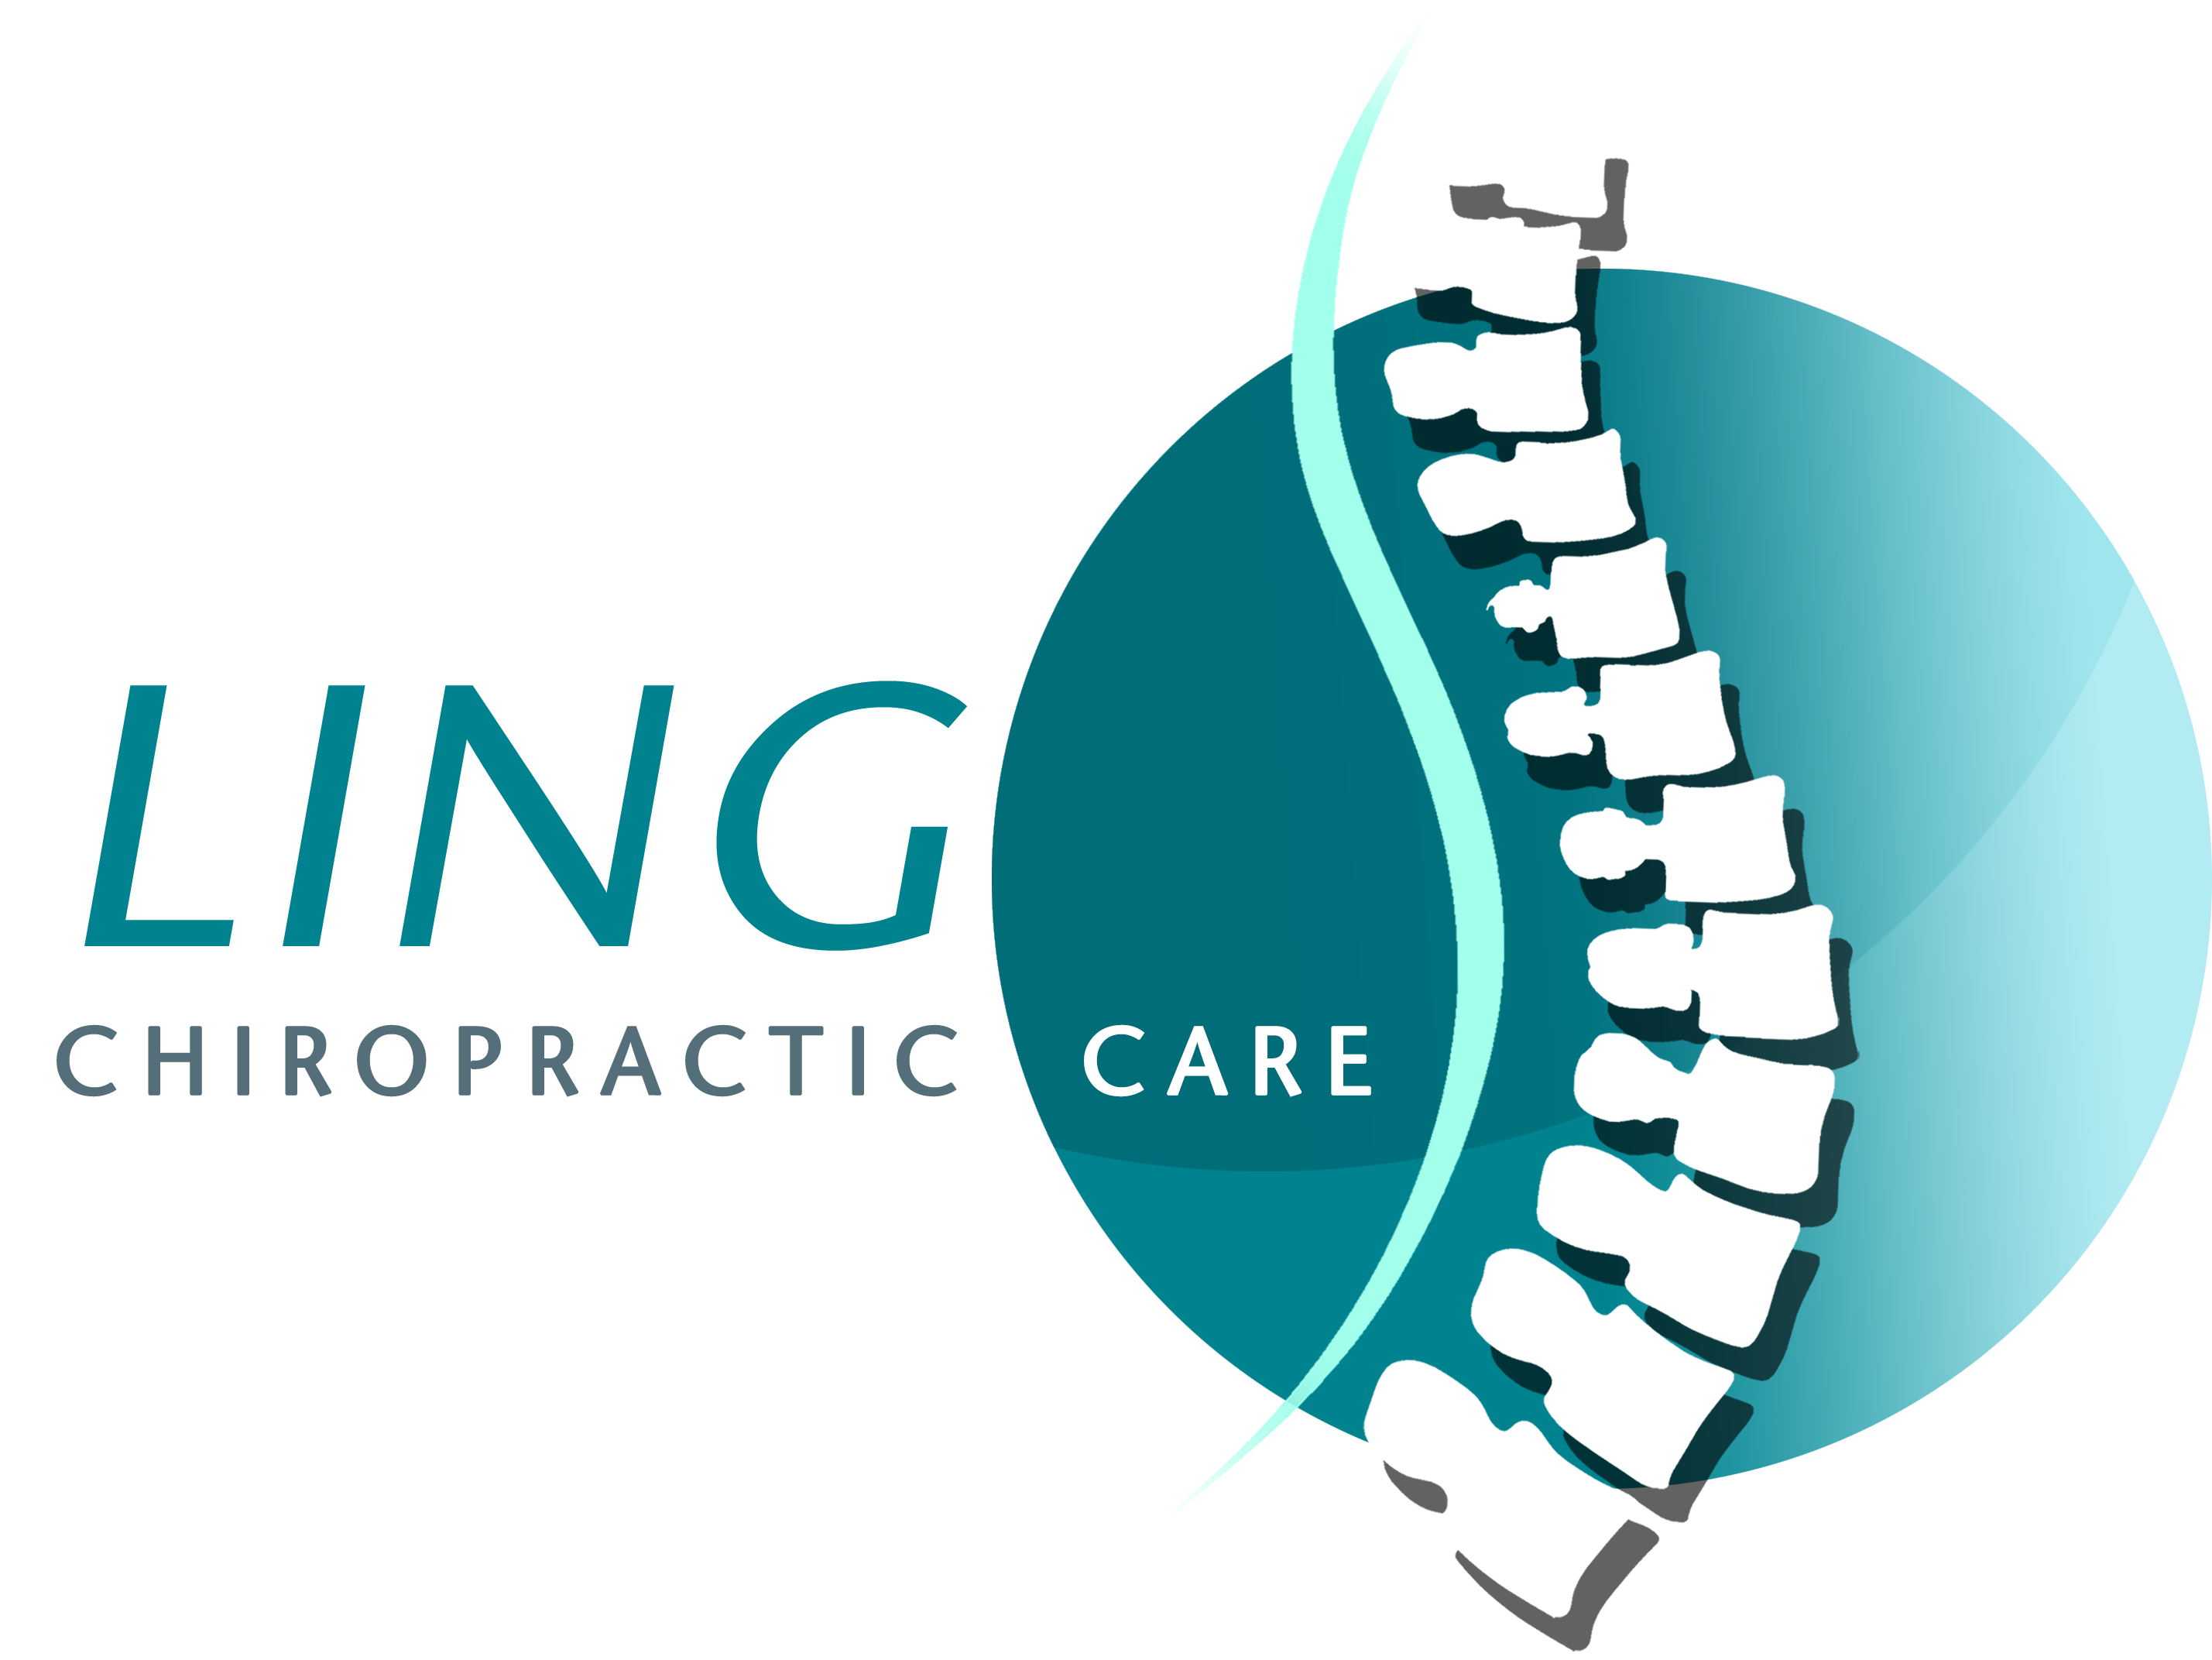 Ling Chiropractic Care